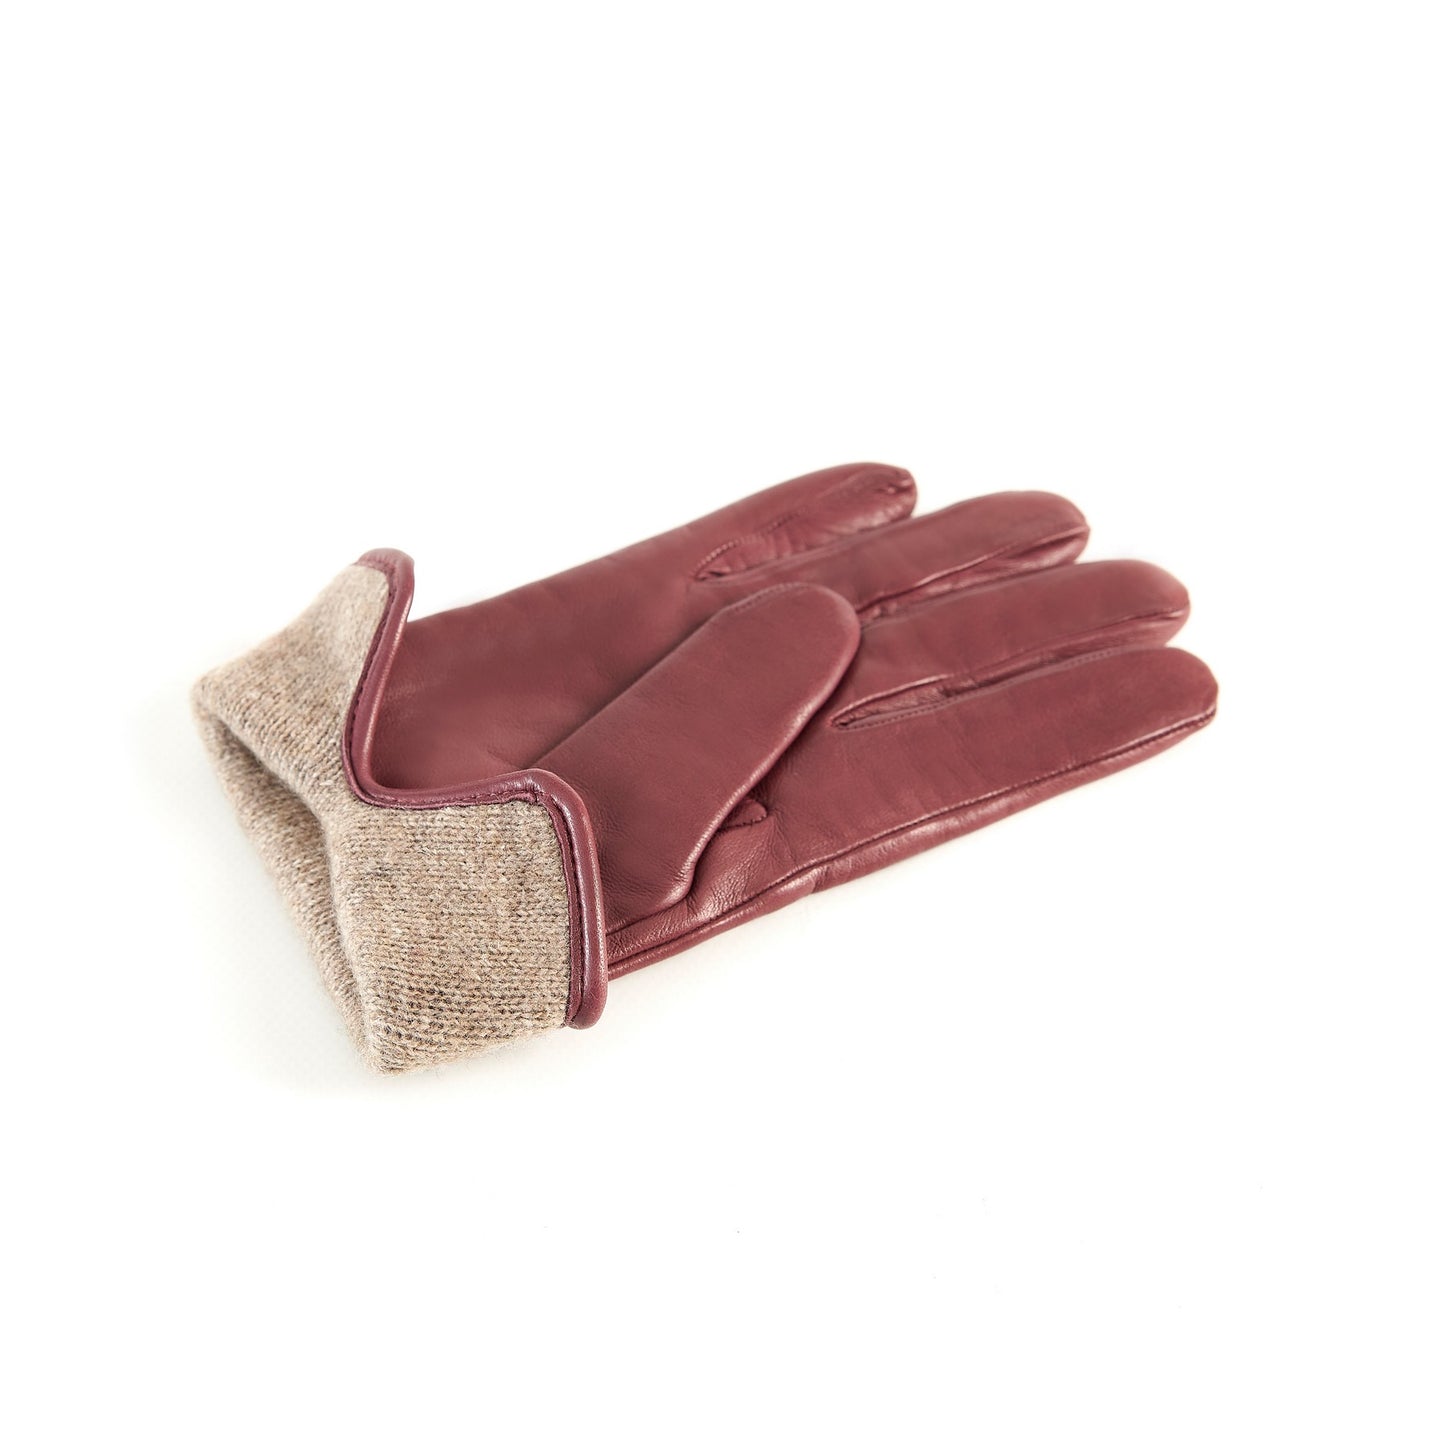 Women’s basic begonia soft nappa leather gloves with palm opening and mix cashmere lining